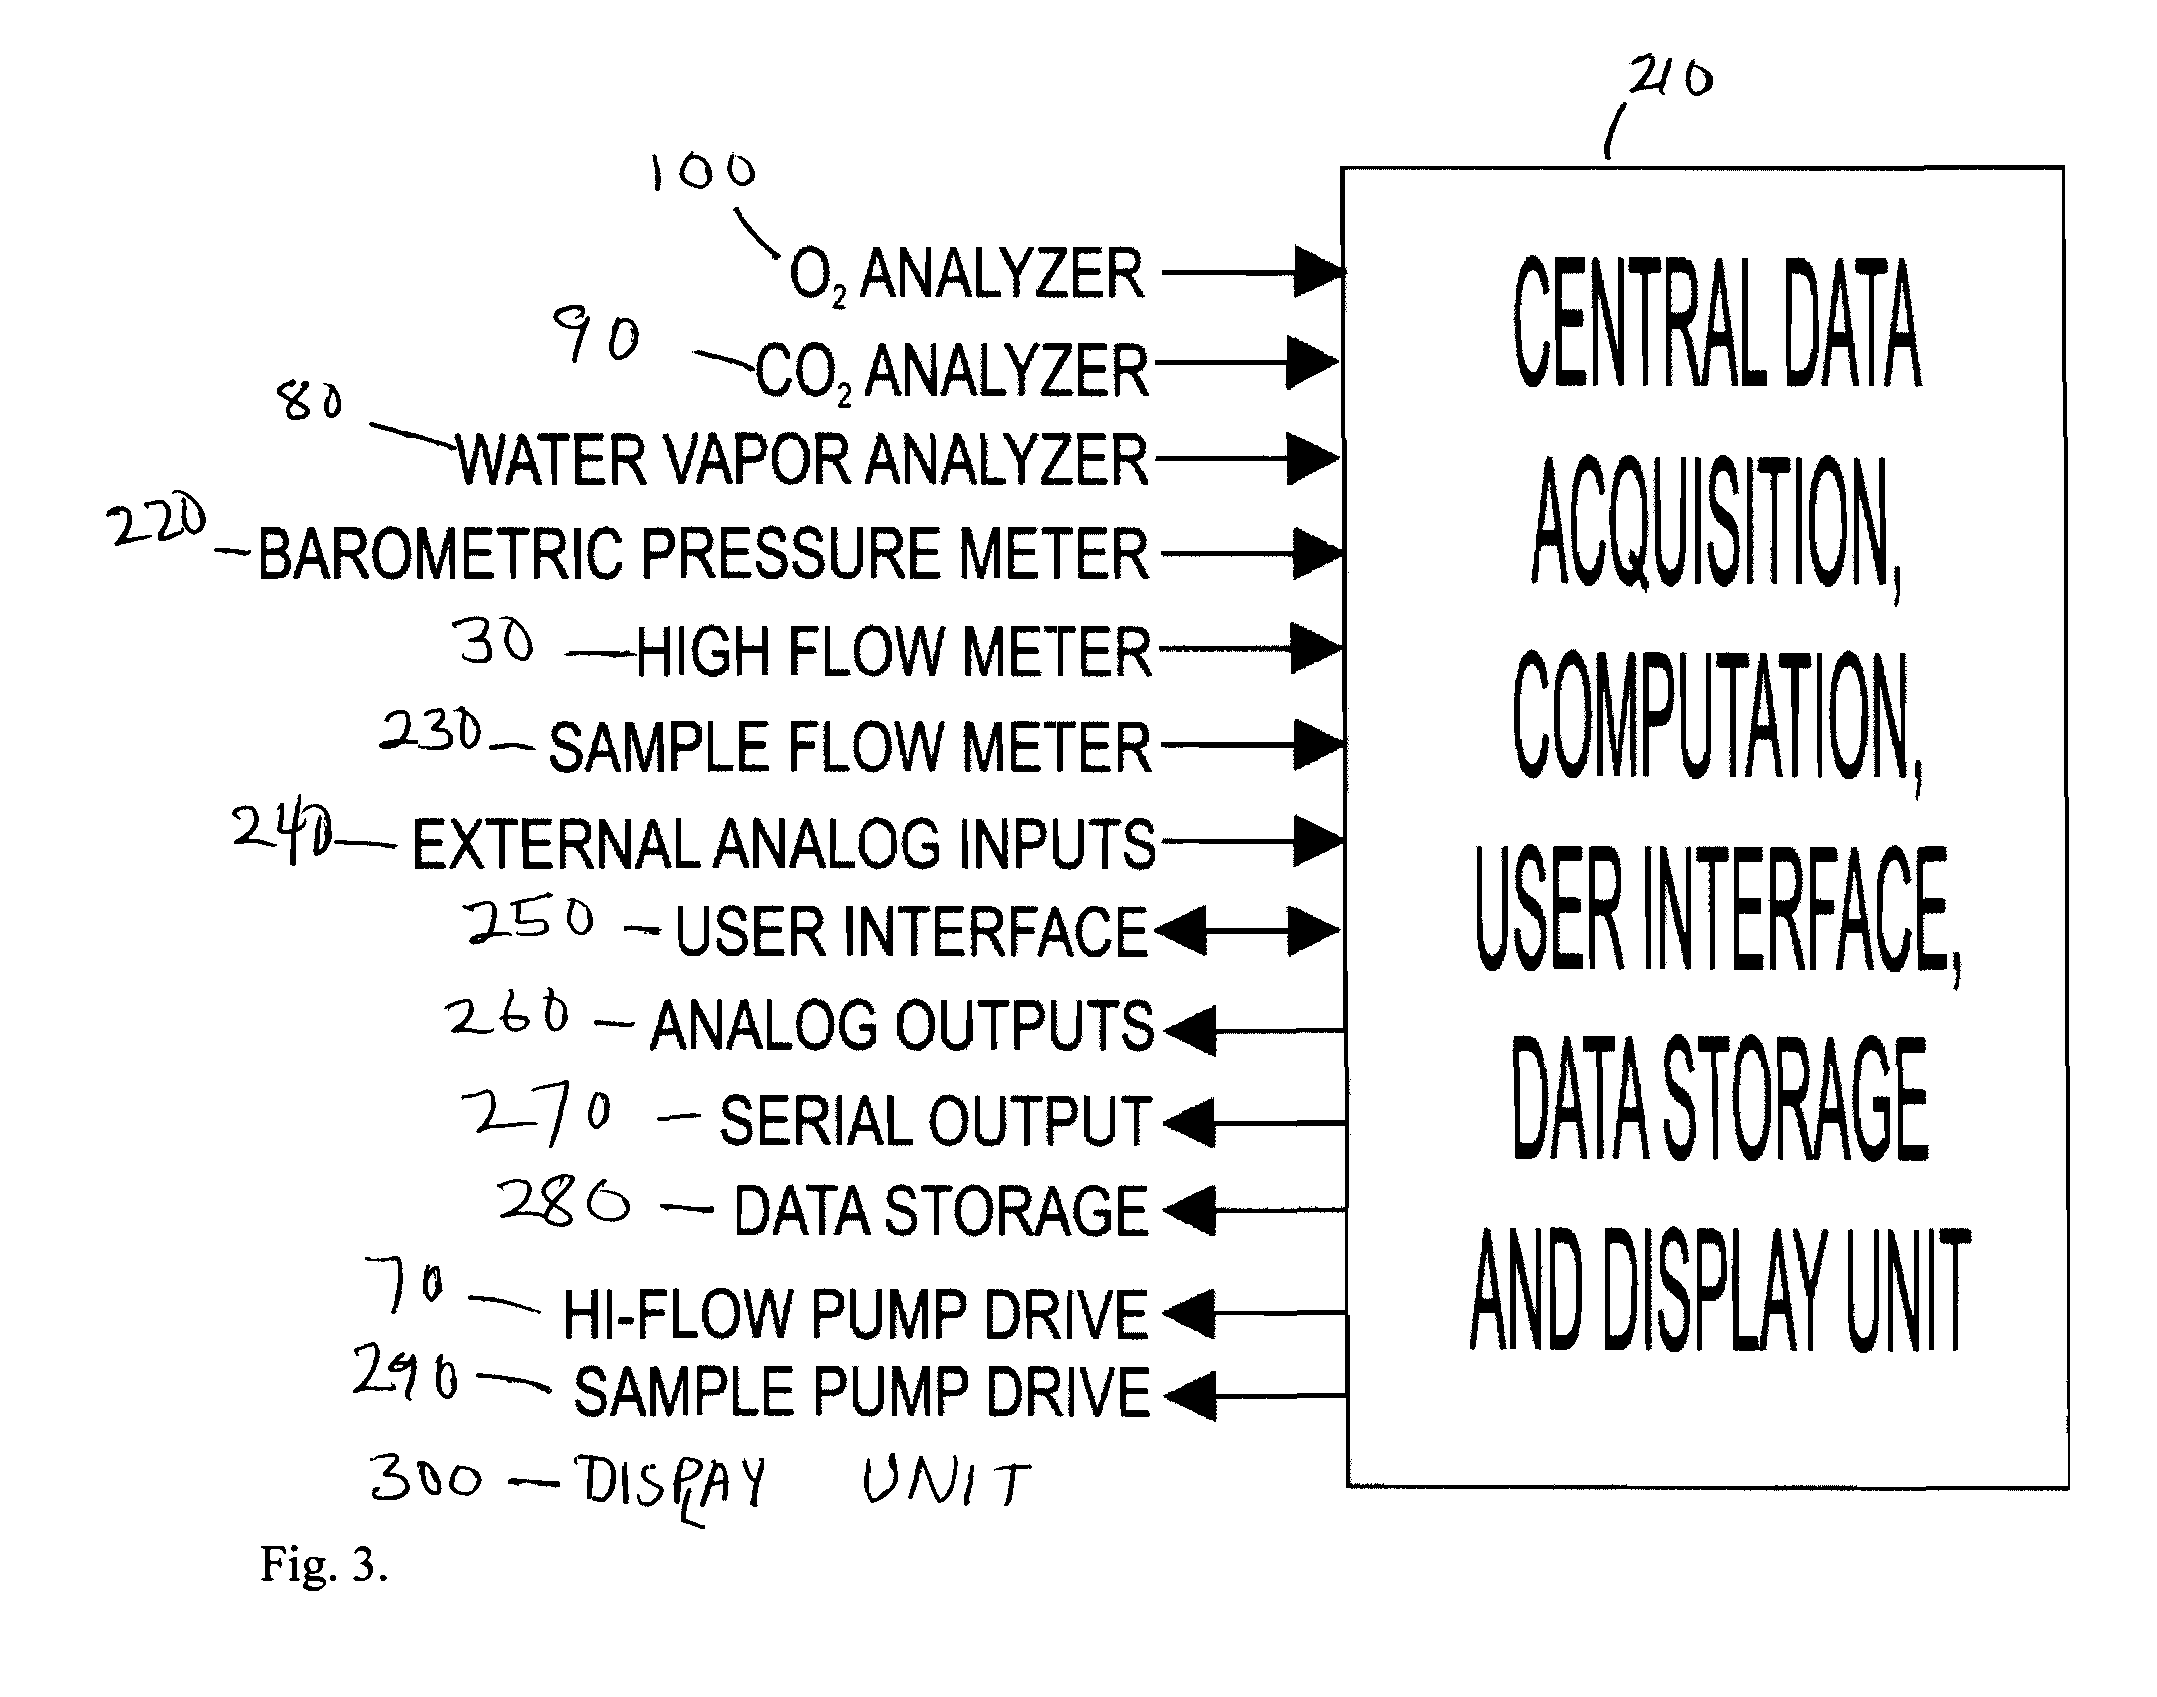 Combined device for analytical measurements